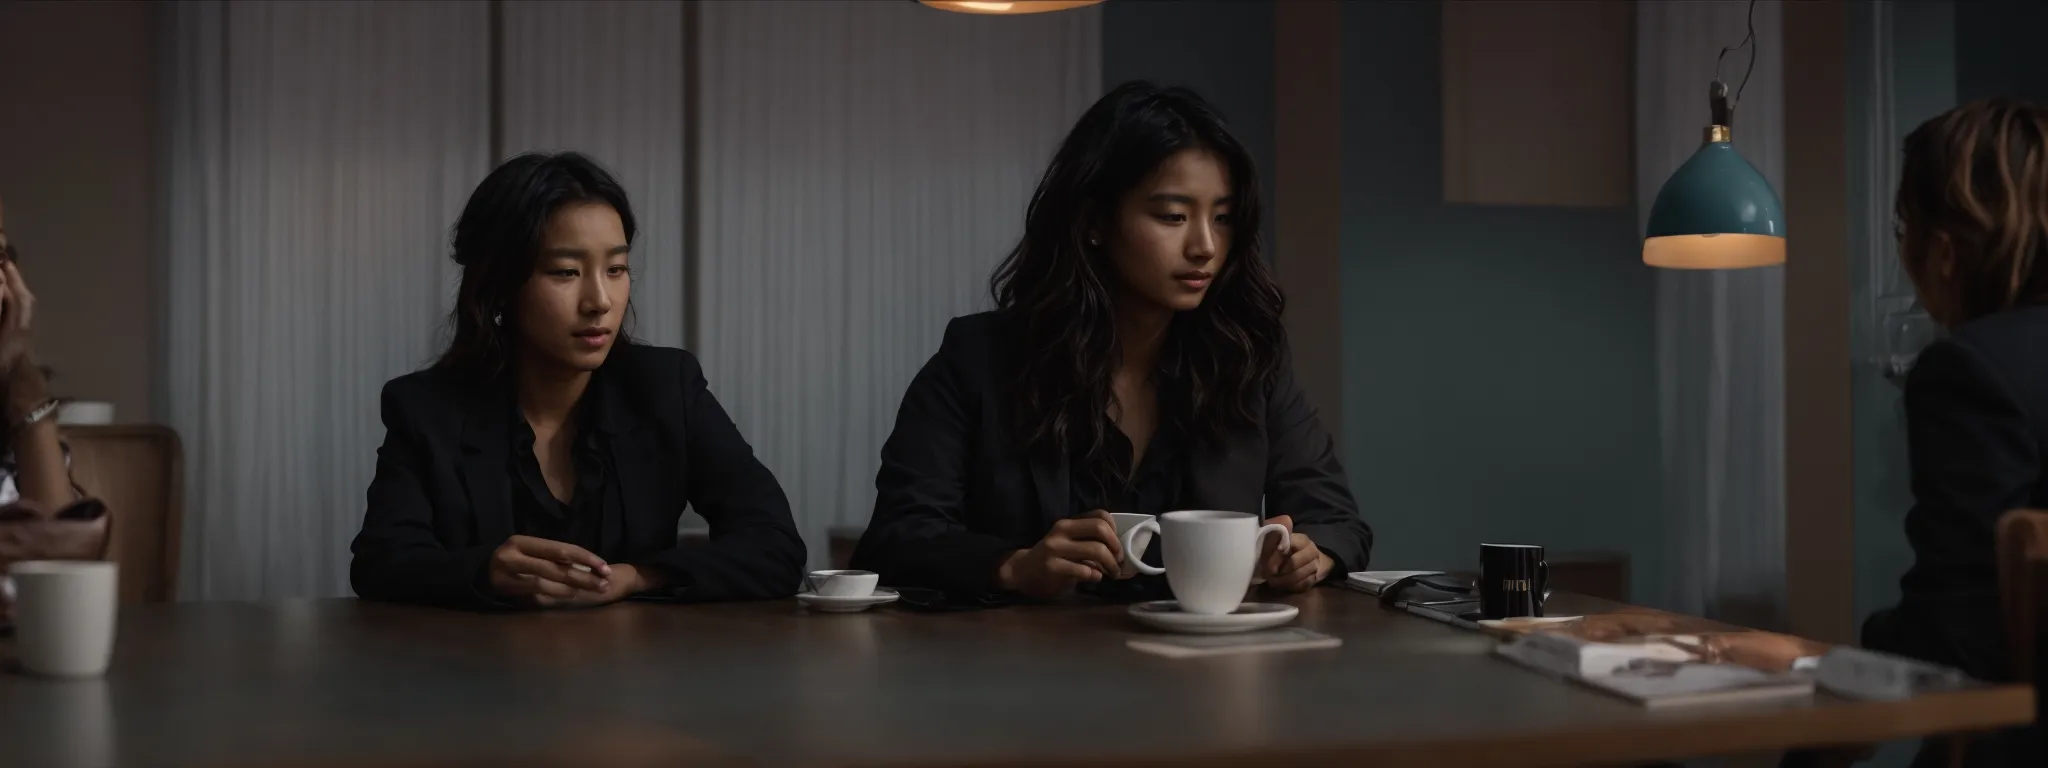 two individuals sit across from each other, coffee cups on the table, engrossed in an animated conversation.